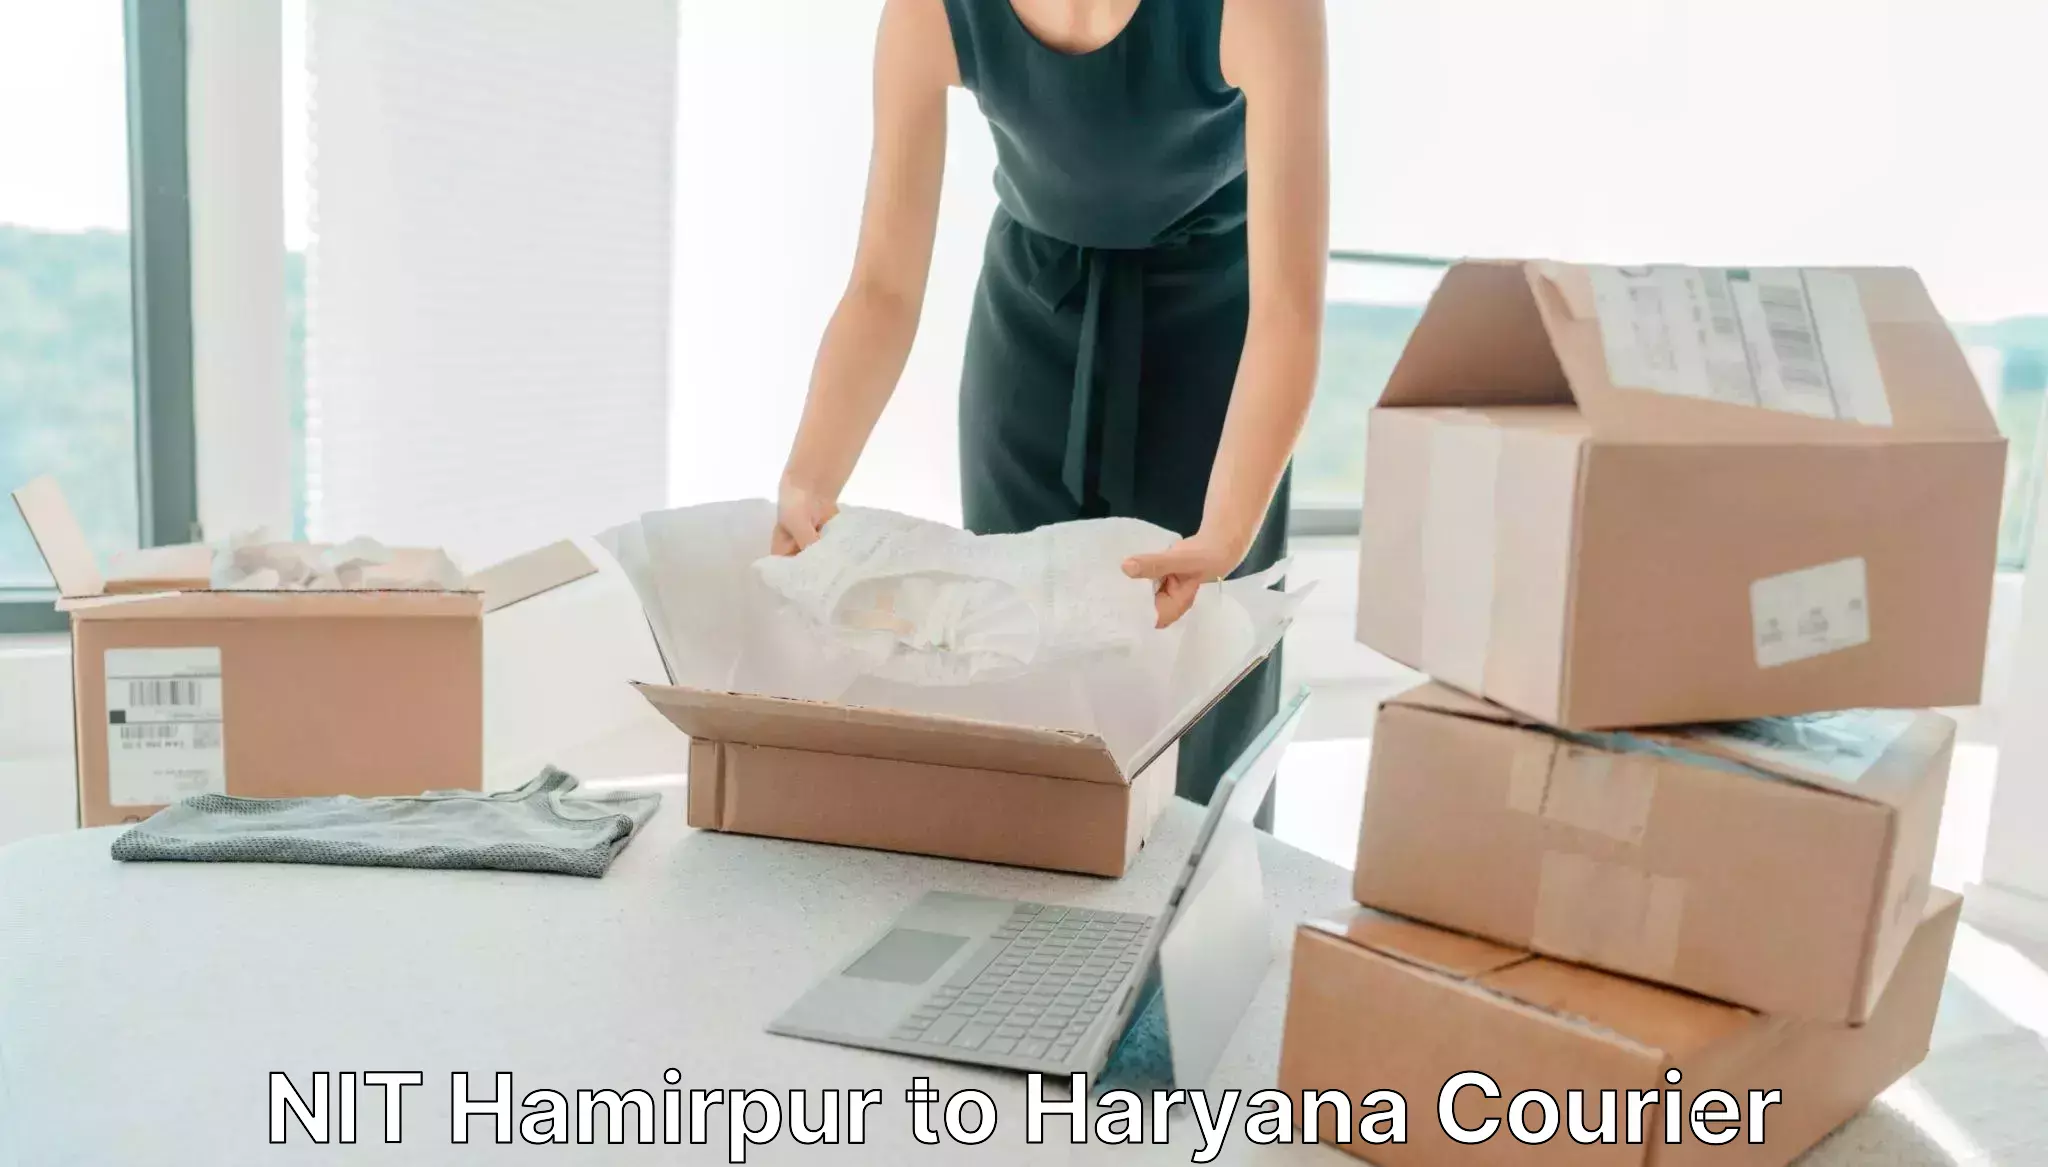 Customer-focused courier in NIT Hamirpur to Chaudhary Charan Singh Haryana Agricultural University Hisar